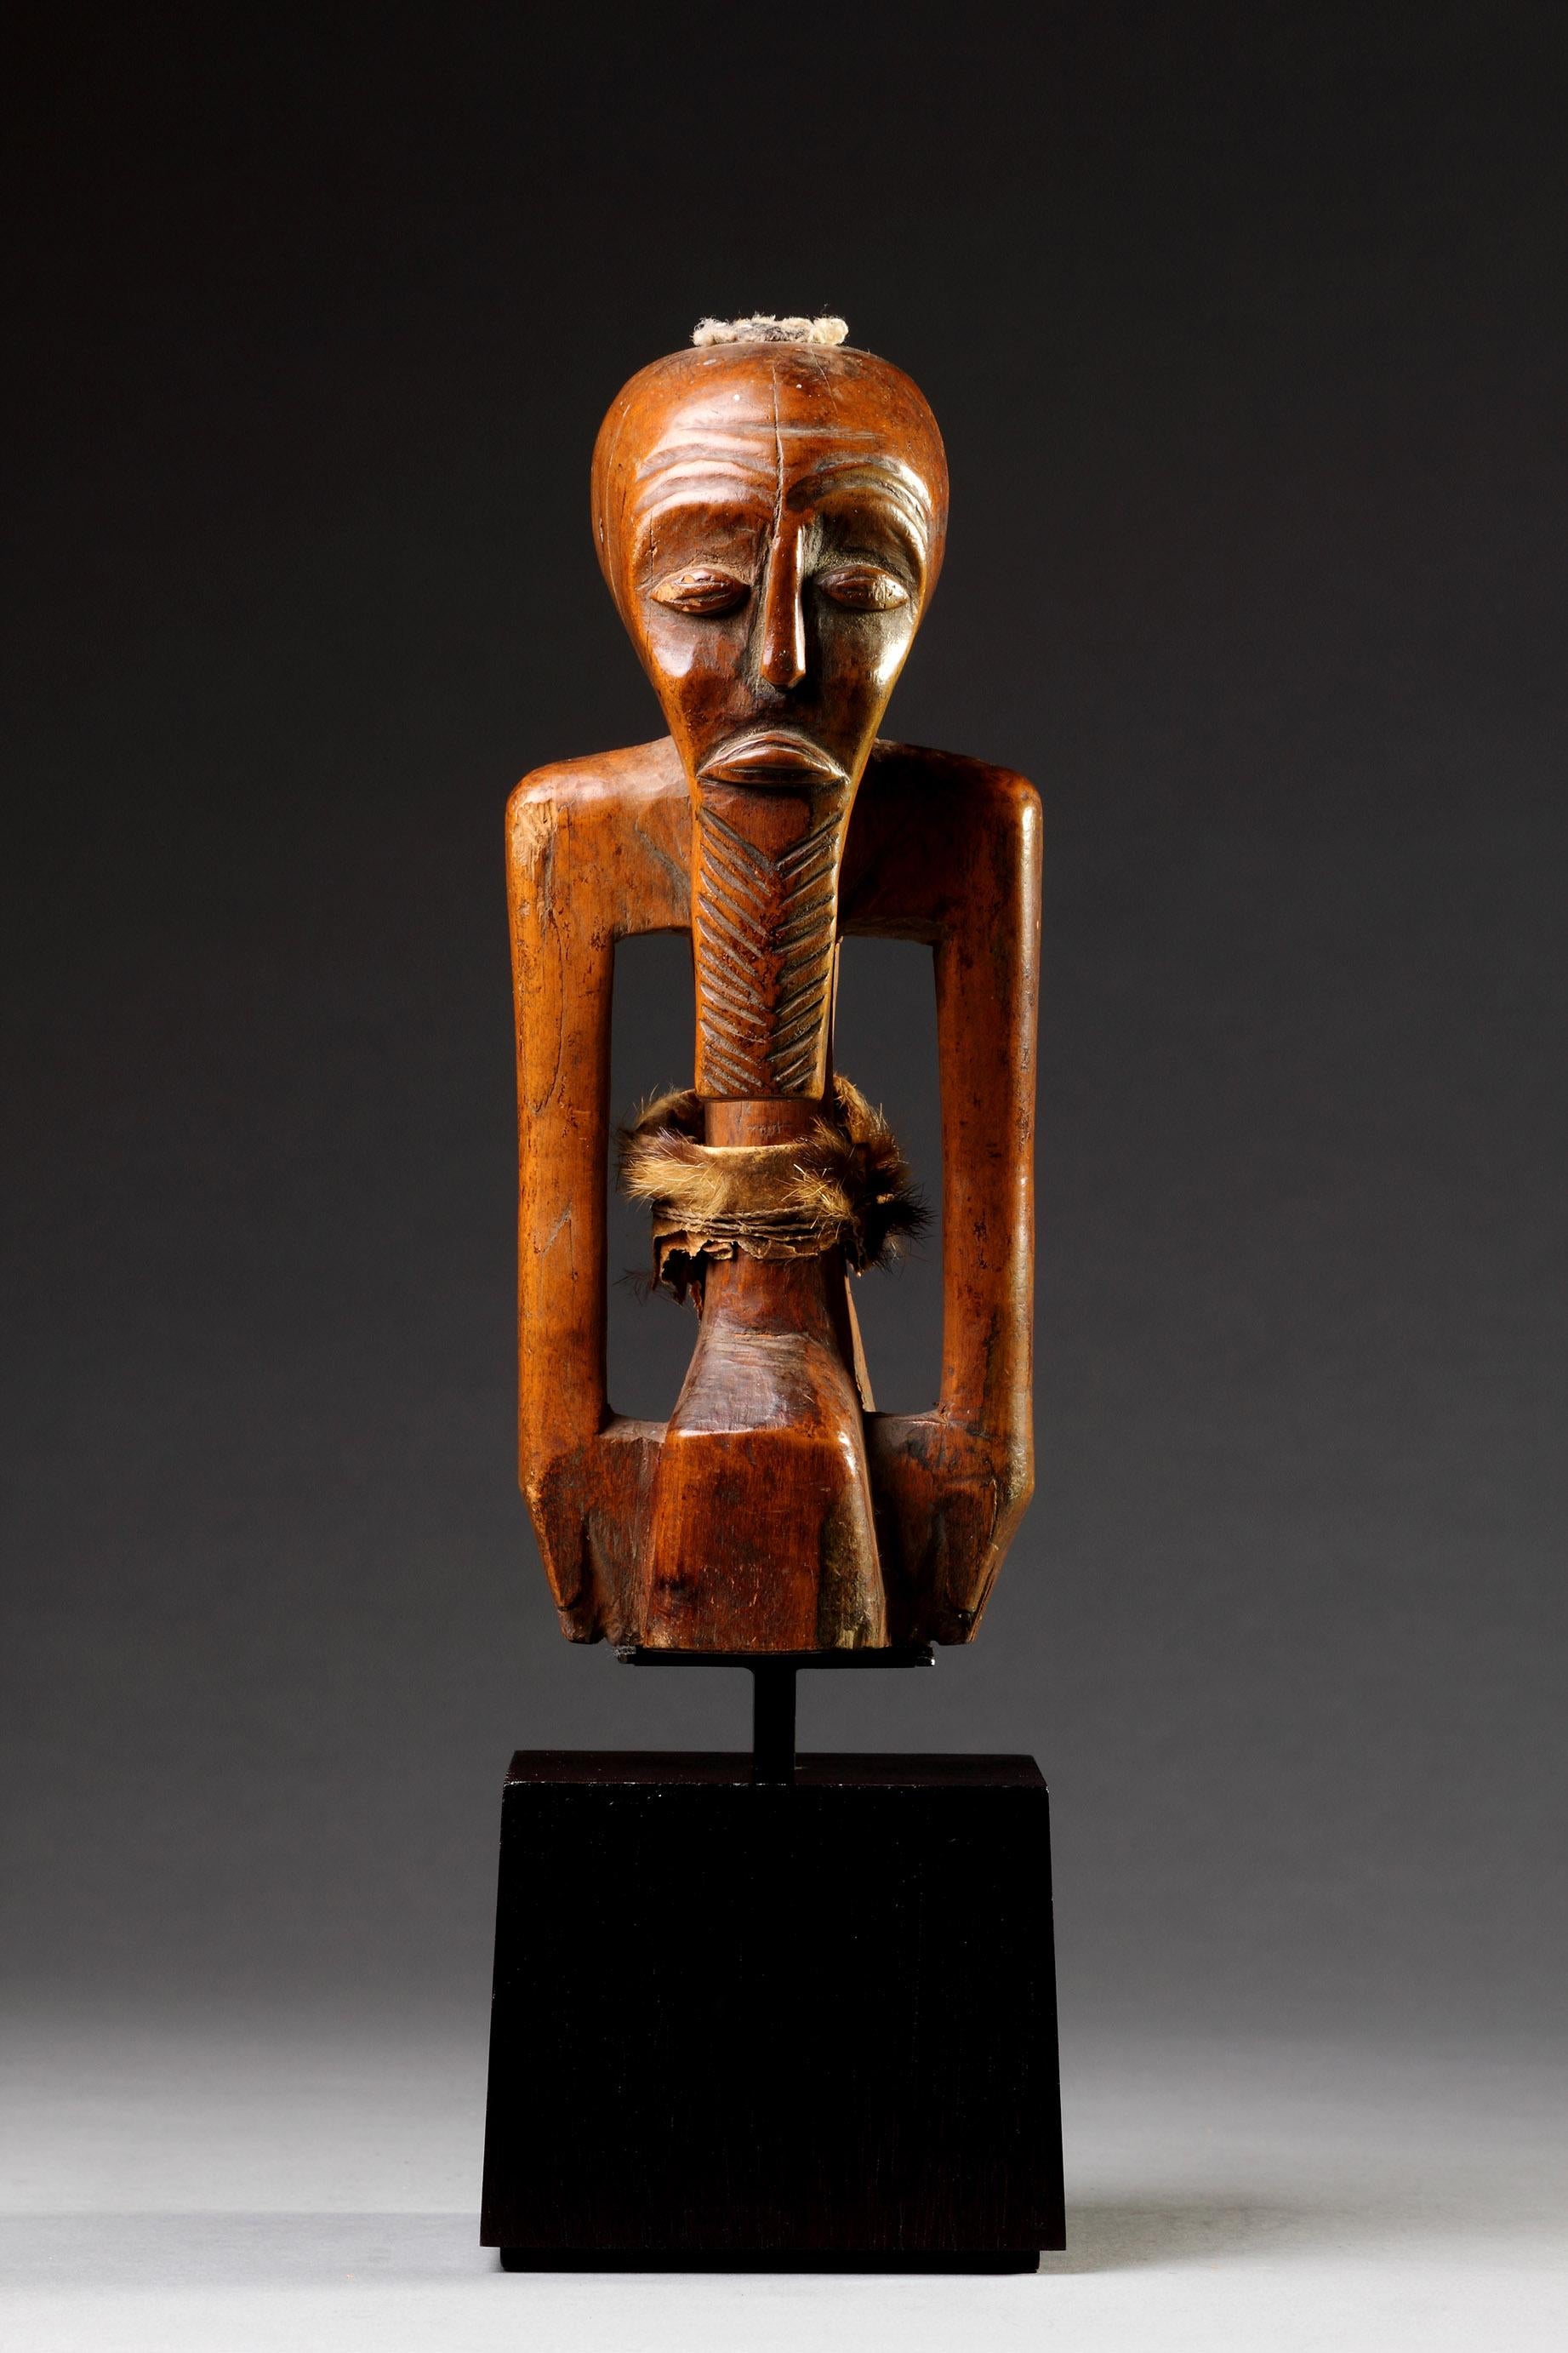 A South Eastern Congo, Zaire Songye Protective Fetish Figure ‘Nkishi’ of Geometric Form the arms placed to the side
A plug of fetish material in the head cavity a strip of old hide and fur around the waist
Old smooth crusted patination
19th Century